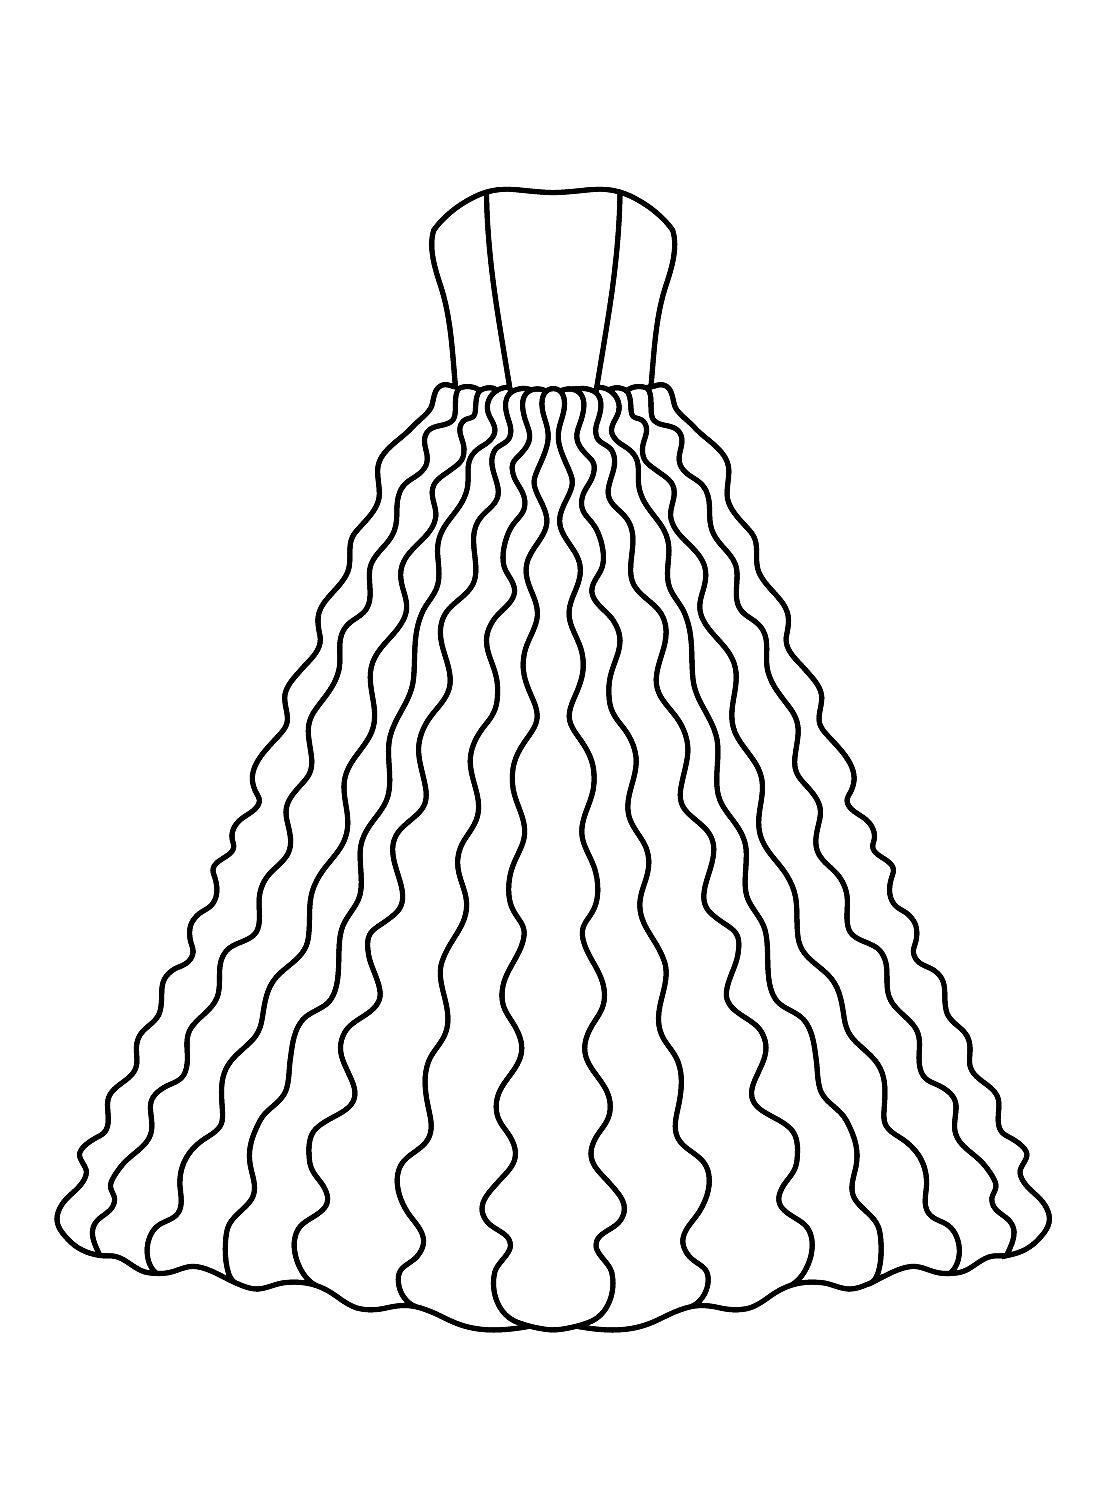 Lace Wedding Dress Coloring Page